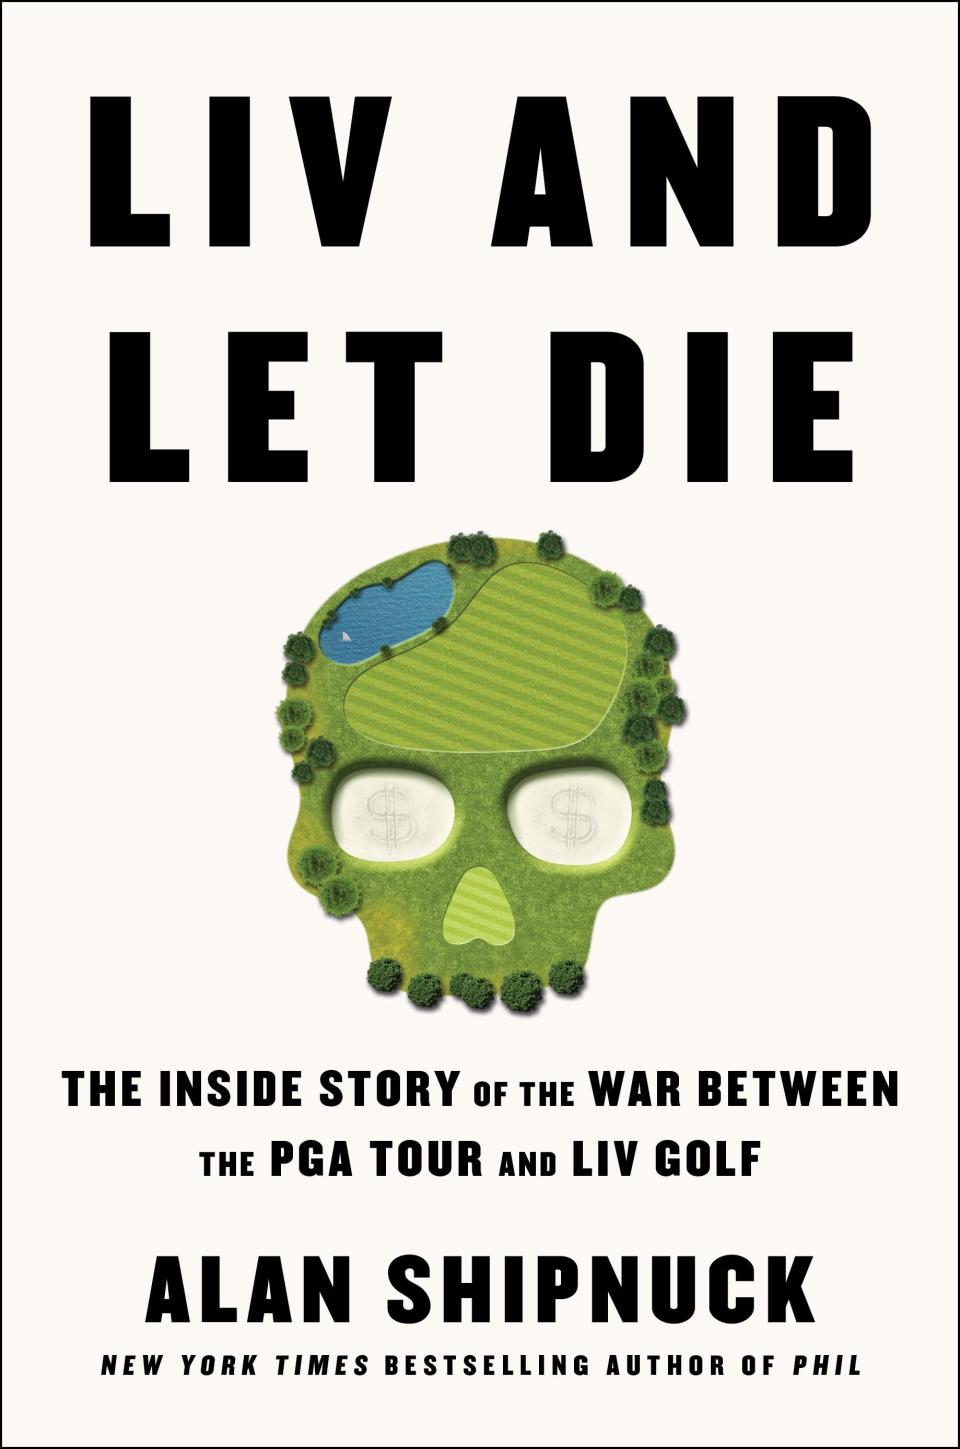 The jacket cover for Alan Shipnuck's book on the seismic changes in professional golf over the past two years.